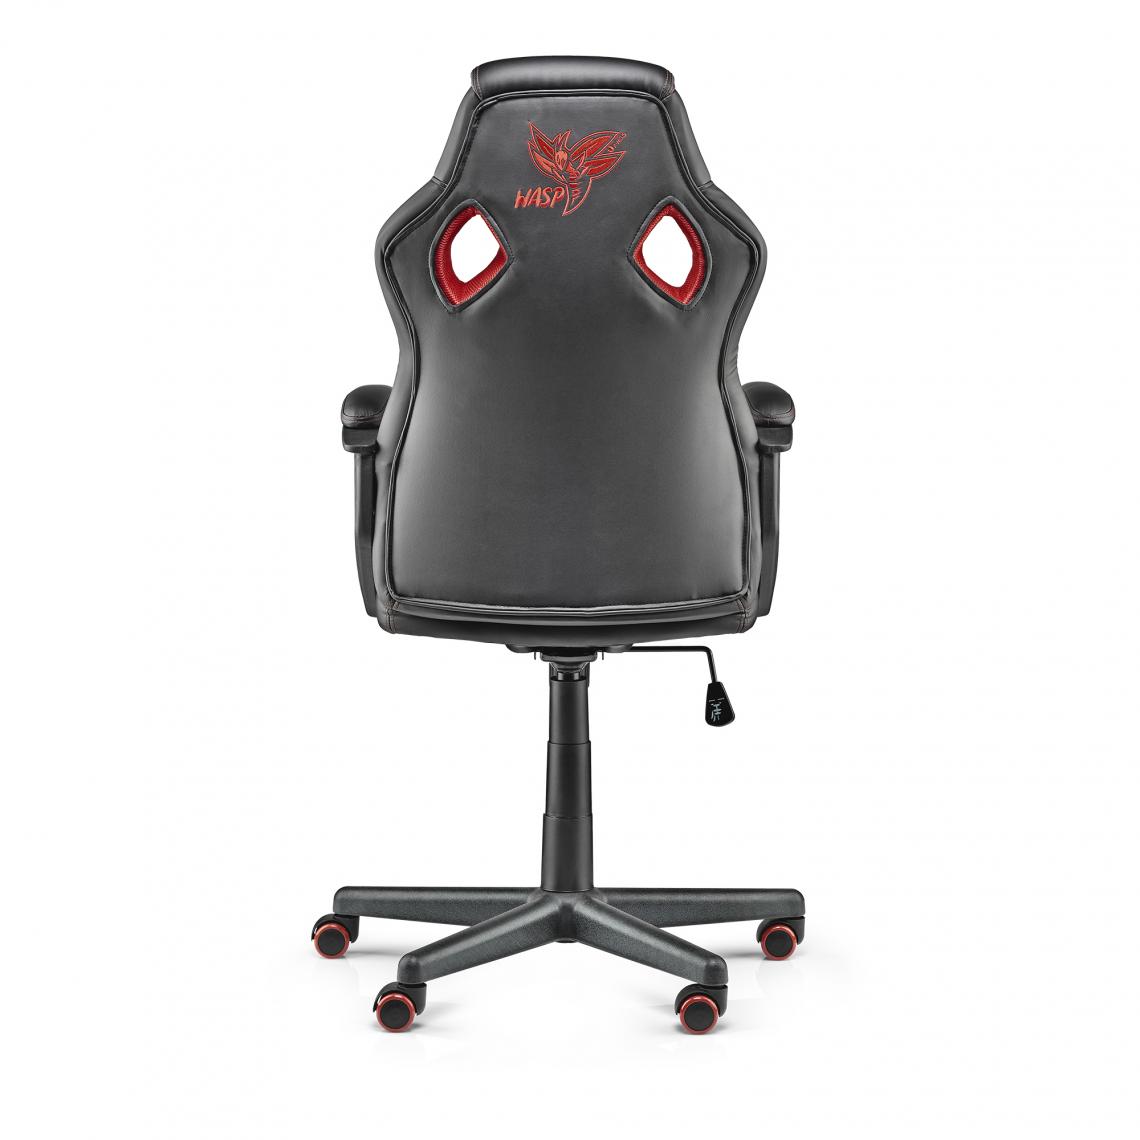 Ngs - Fauteuil Gamer Wasp (Noir/Rouge) - Chaise gamer